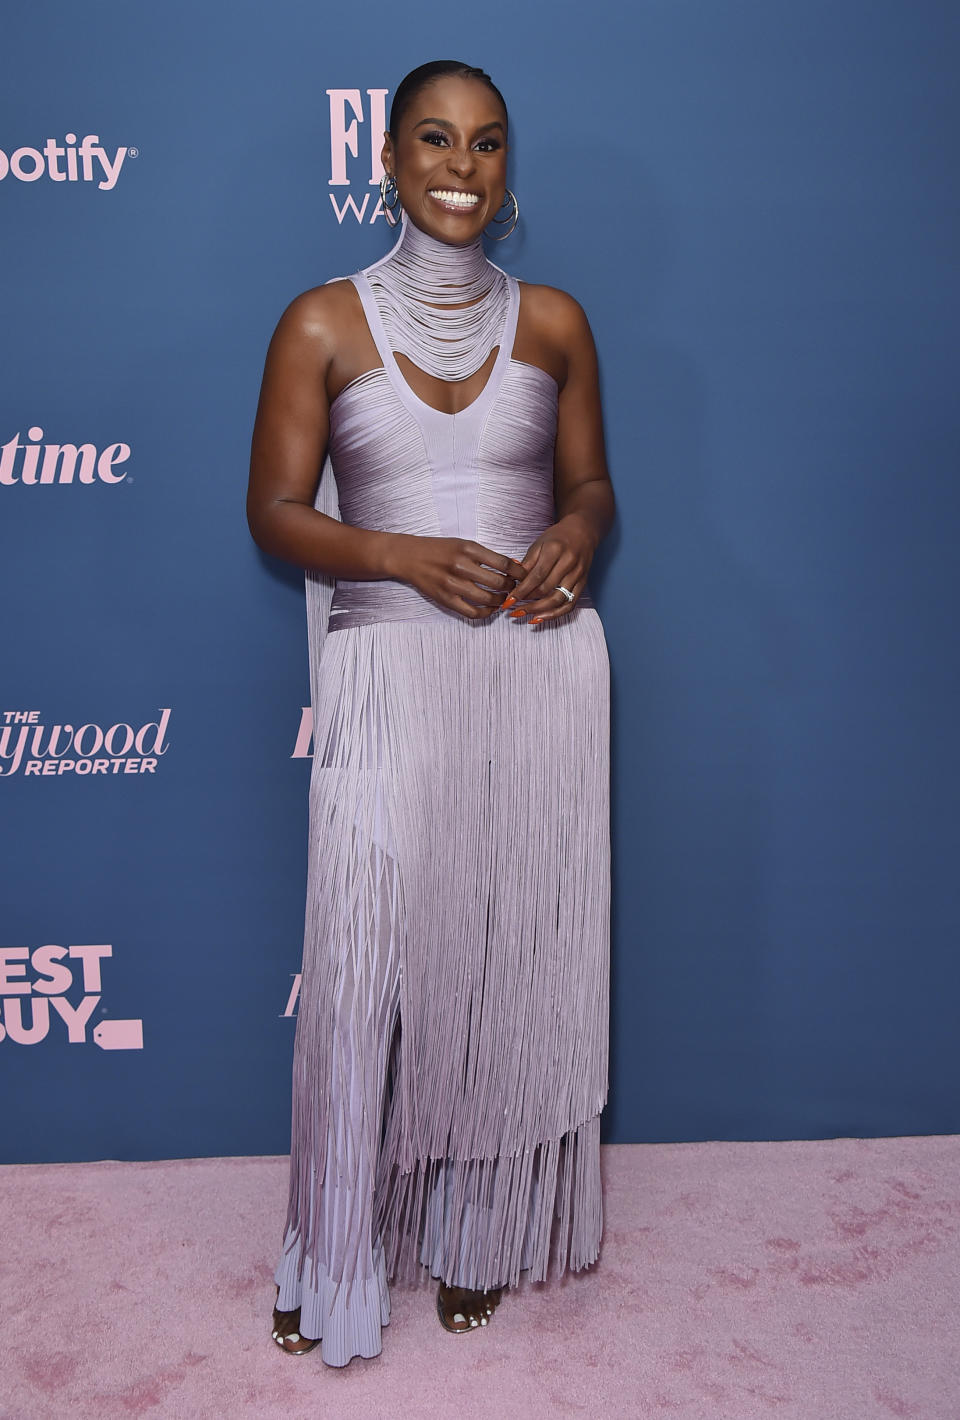 Issa Rae arrives at The Hollywood Reporter's Women in Entertainment Gala on Wednesday, Dec. 7, 2022, at Fairmont Century Plaza in Los Angeles. (Photo by Jordan Strauss/Invision/AP)